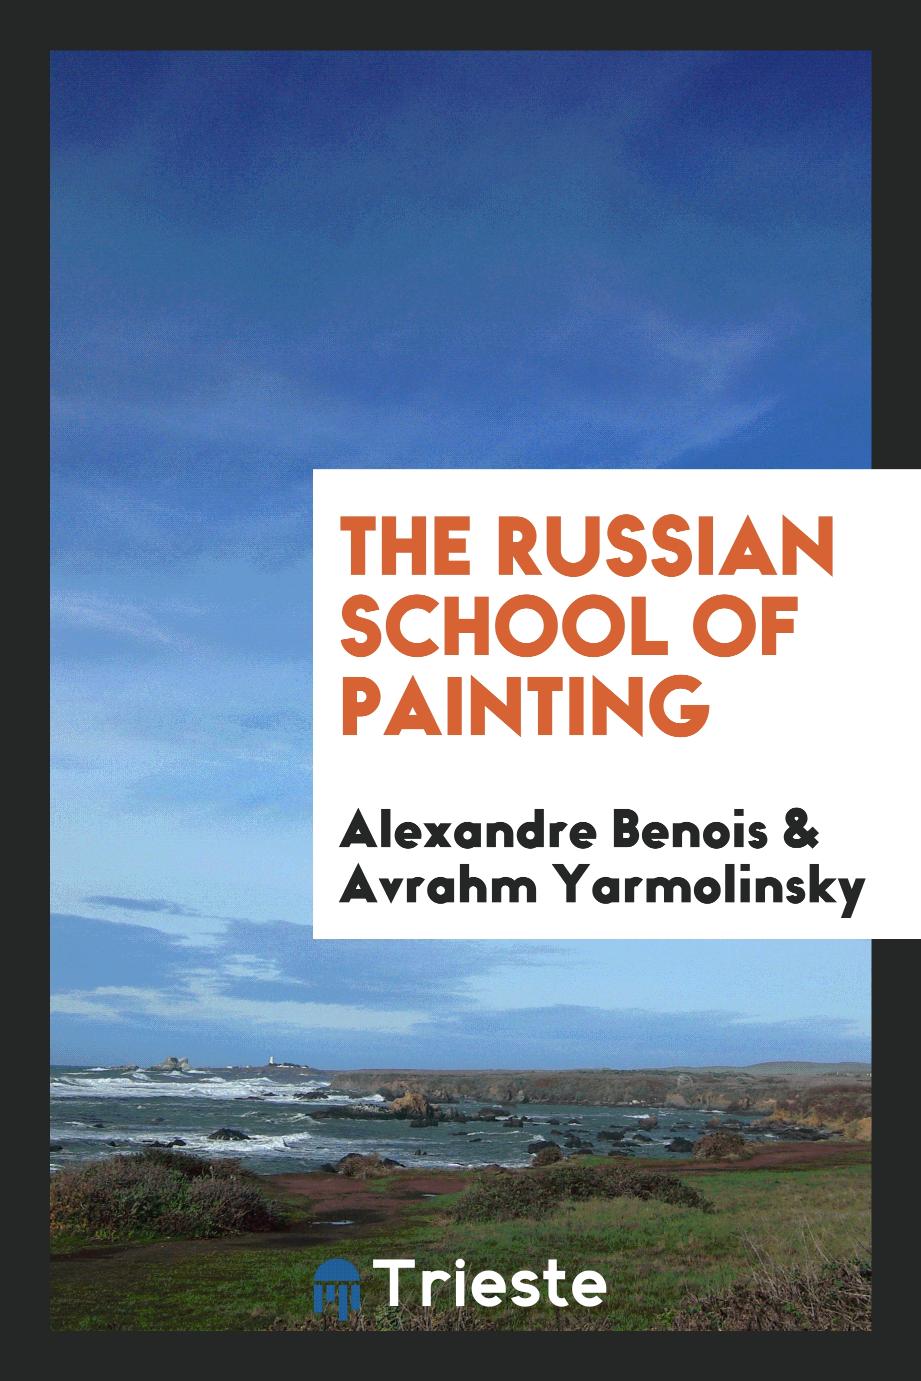 The Russian school of painting